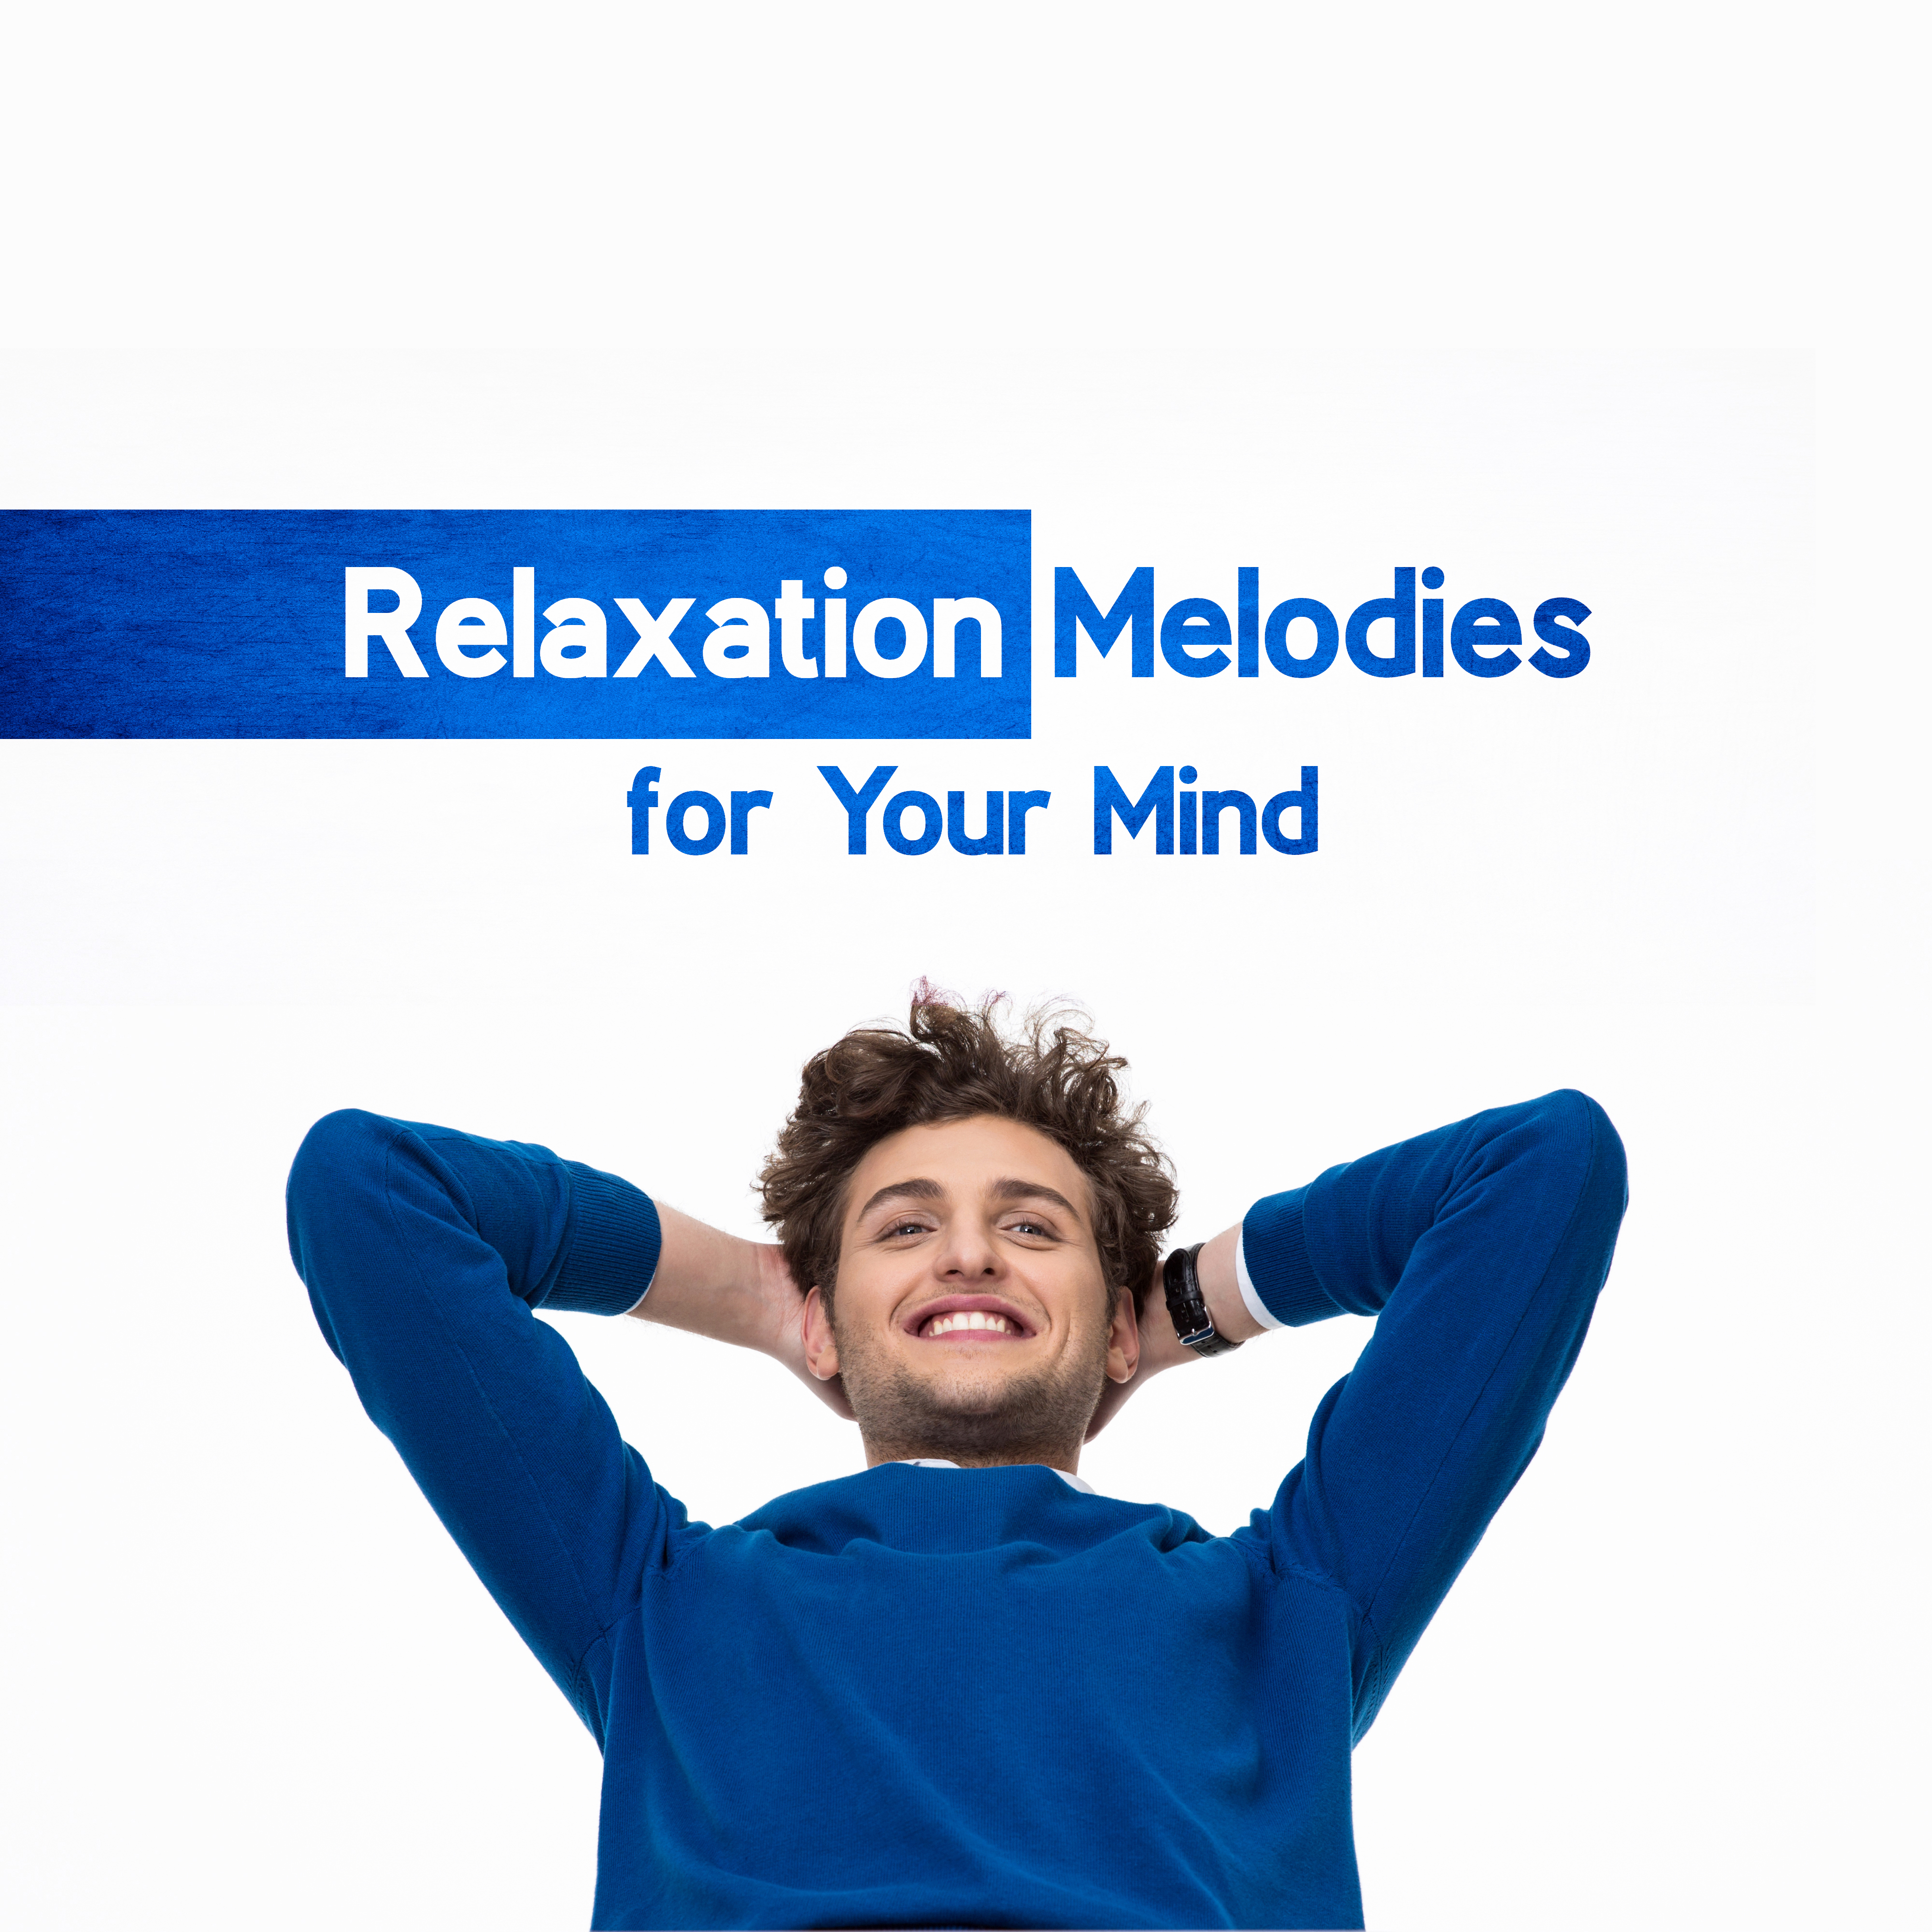 Relaxation Melodies for Your Mind